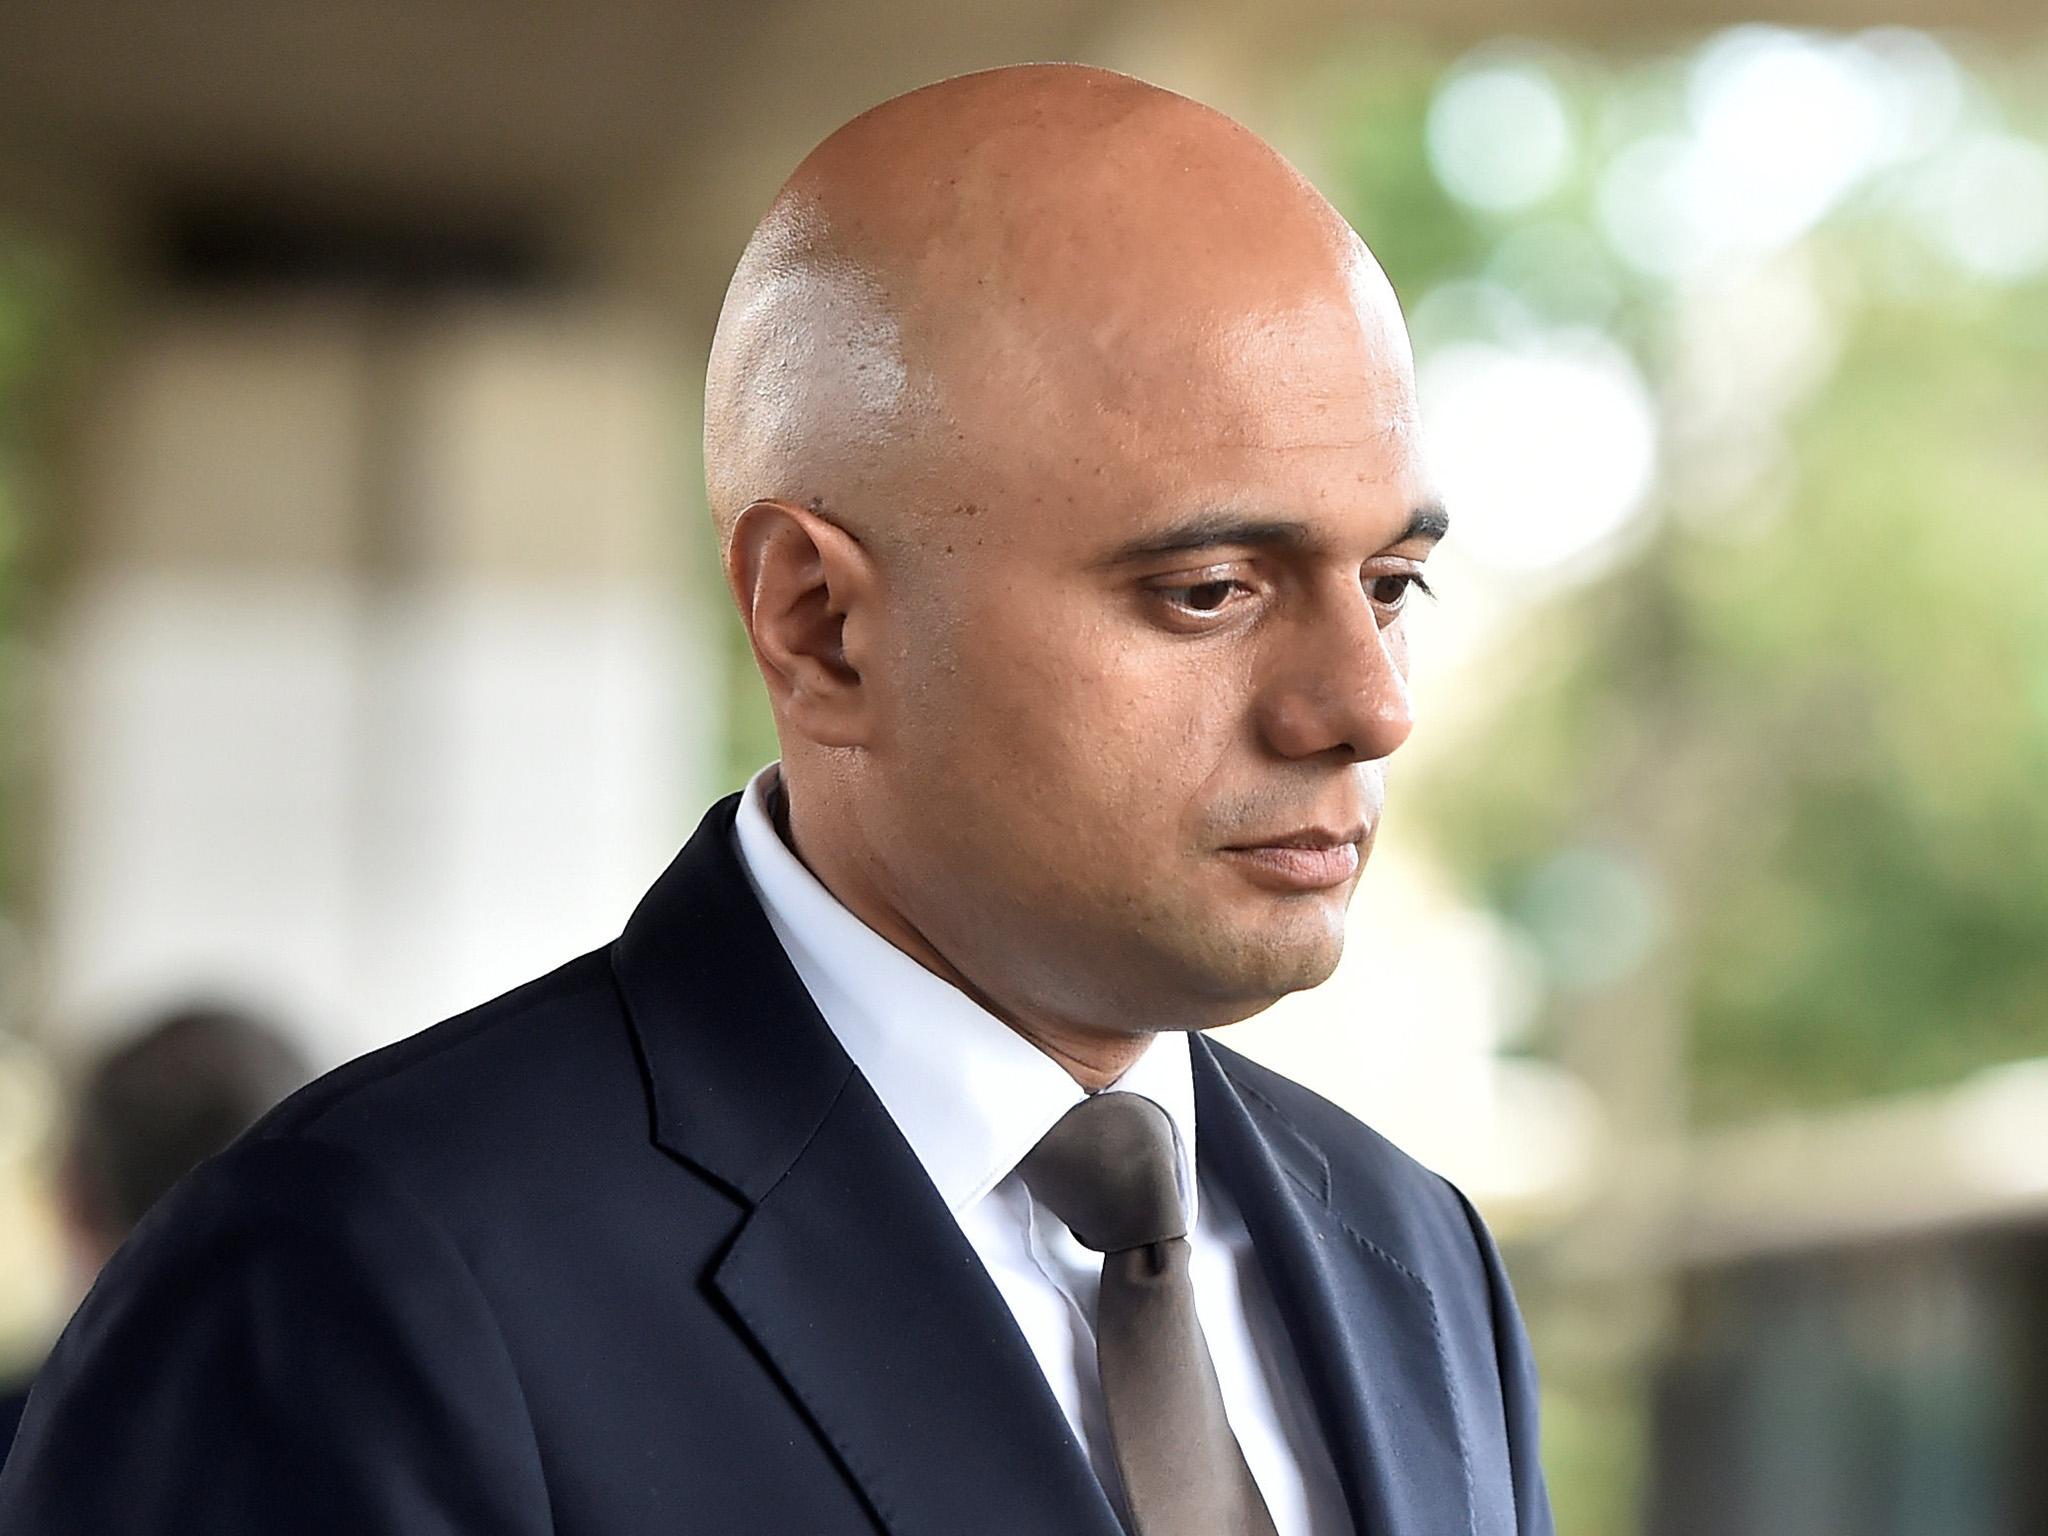 Sajid Javid is the first government minister to criticise Donald Trump's comments